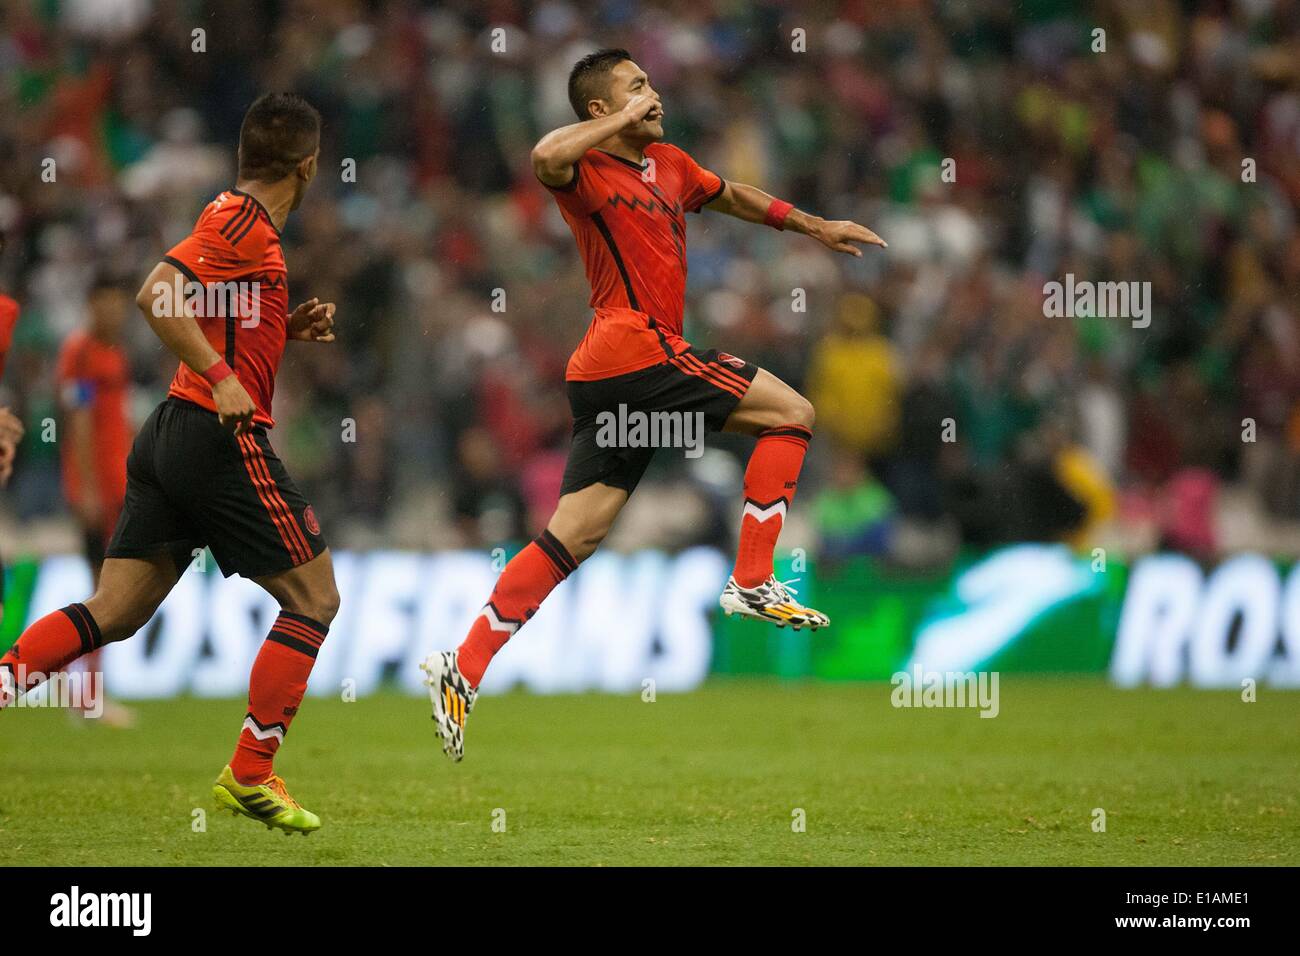 Mexico City, Mexico. 28th May, 2014. Marco Fabian (R) from Mexico celebrates scoring during a friendly match against Israel at the Azteca Stadium in Mexico City, capital of Mexico, on May 28, 2014. Credit:  David de la Paz/Xinhua/Alamy Live News Stock Photo